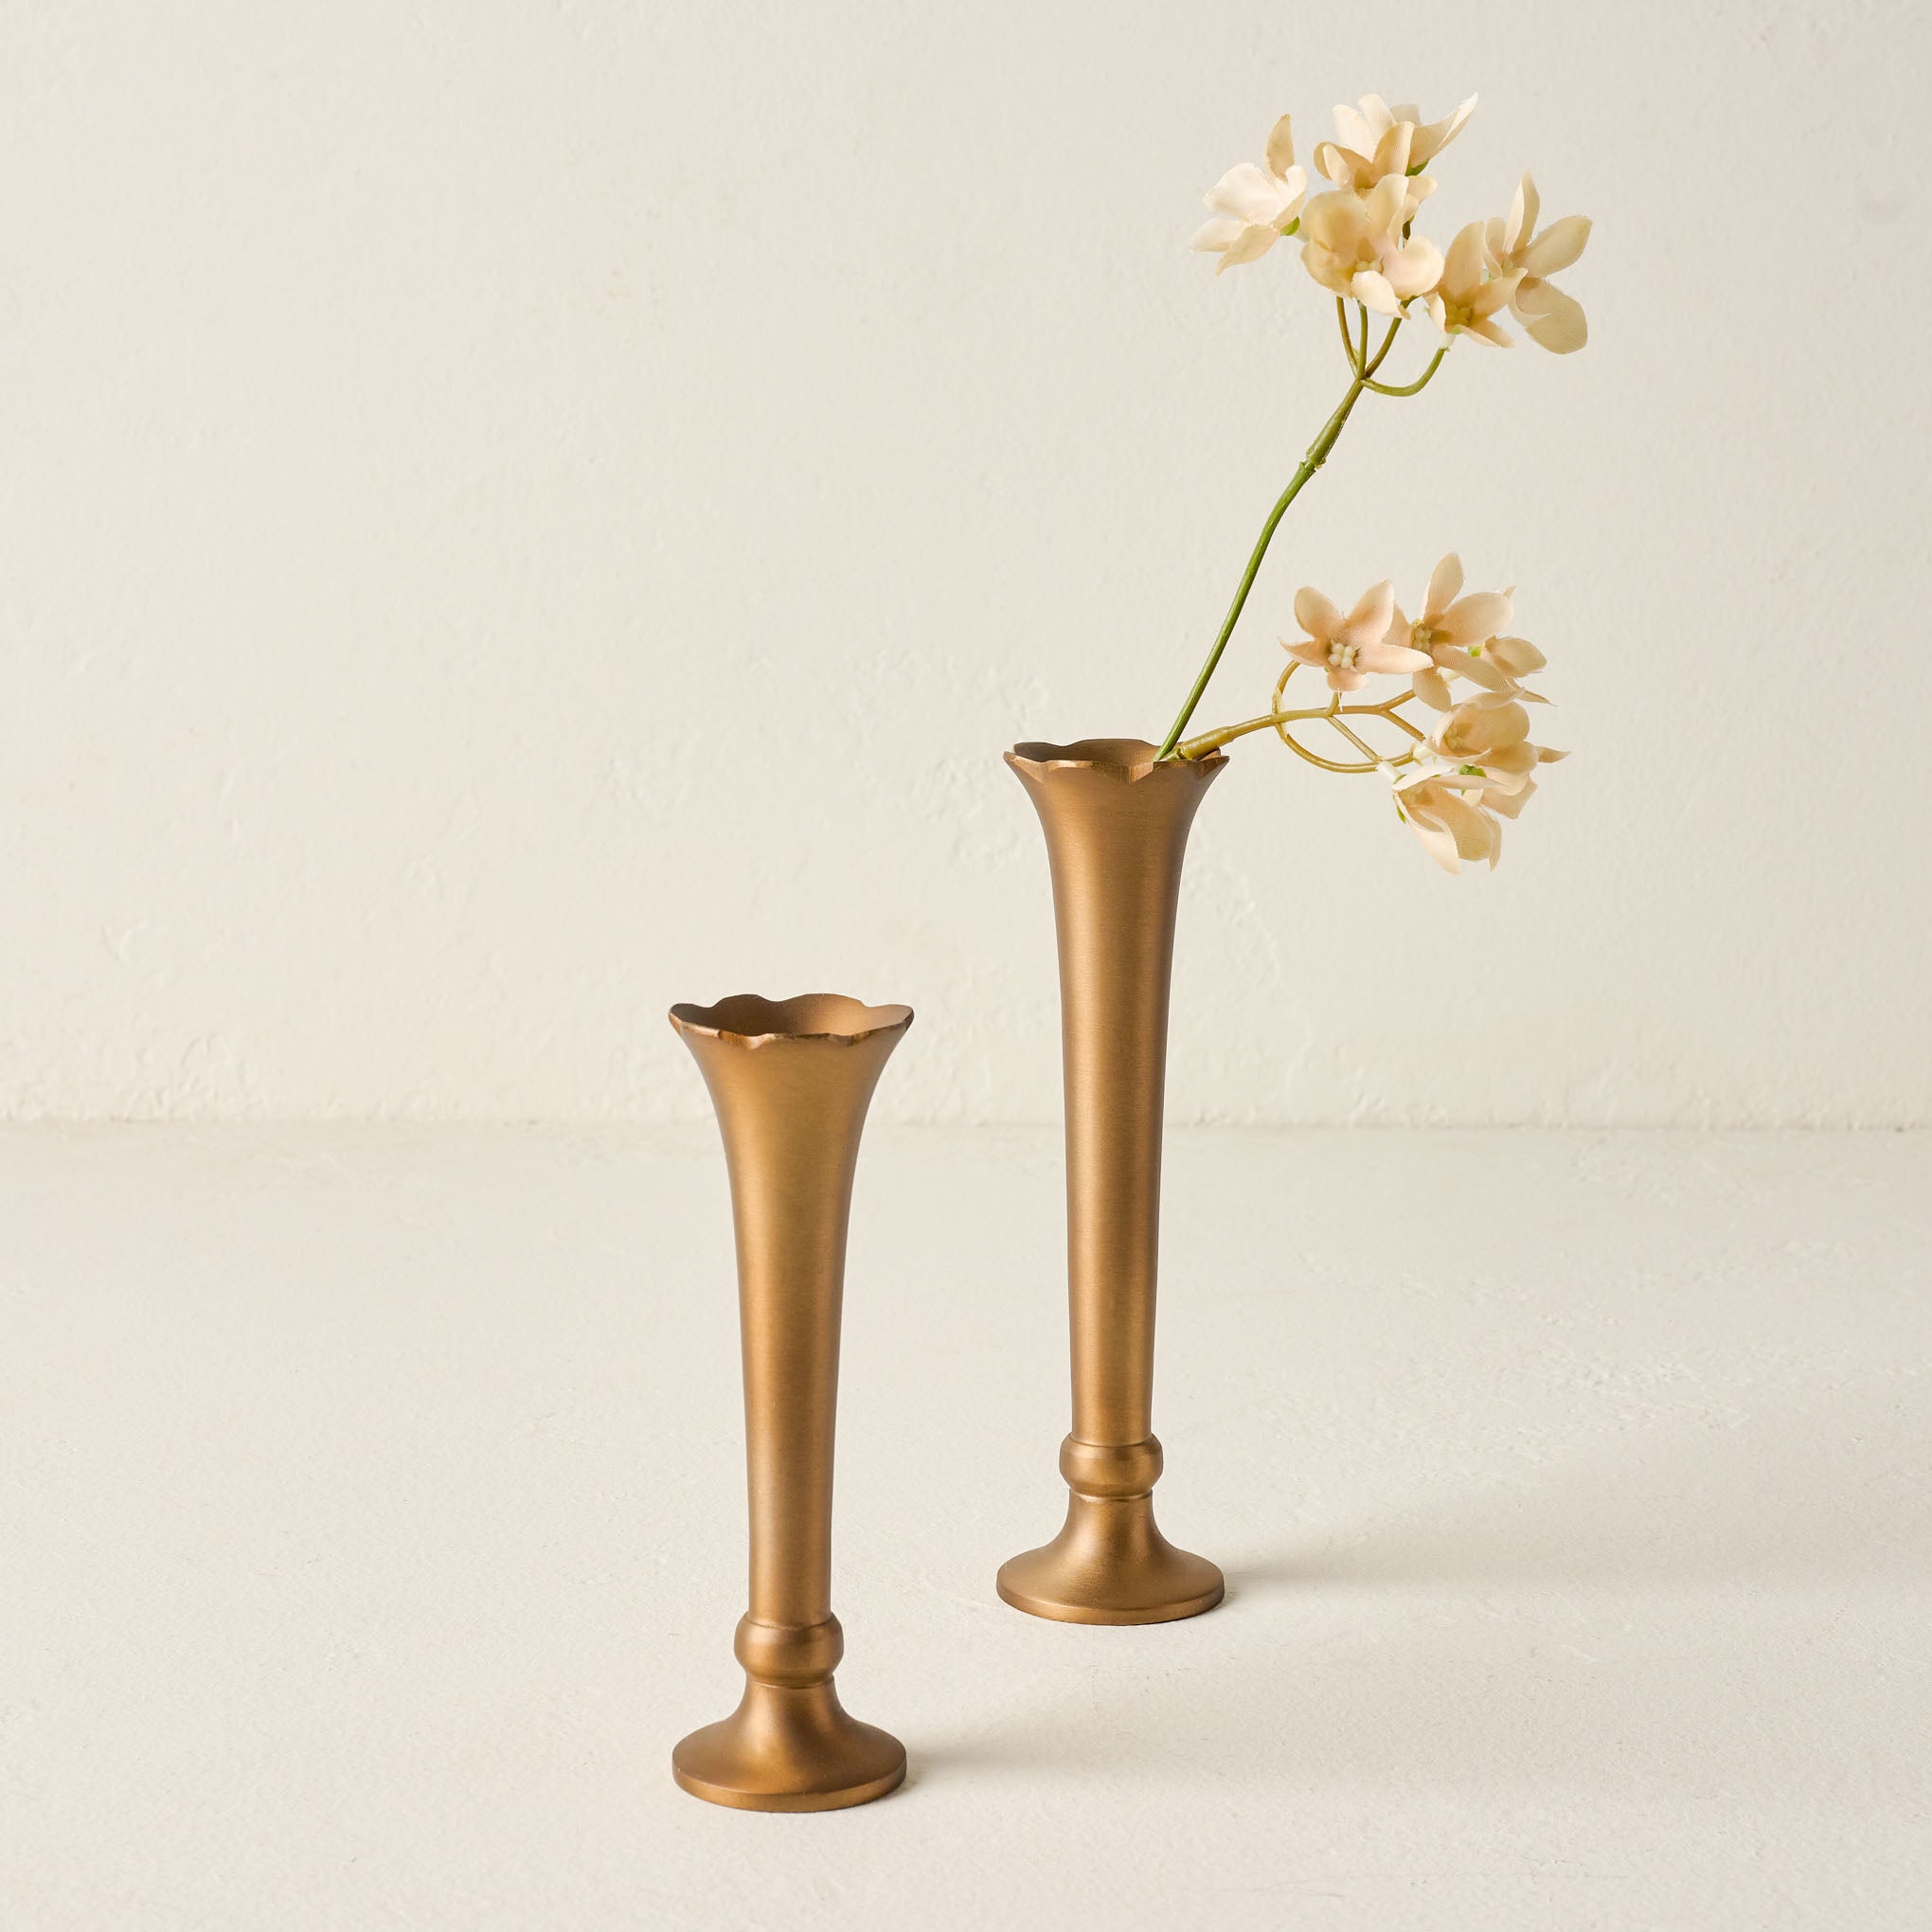 Flannery Scalloped Brass Bud Vase with faux florals inside Items range from $18.00 to $22.00